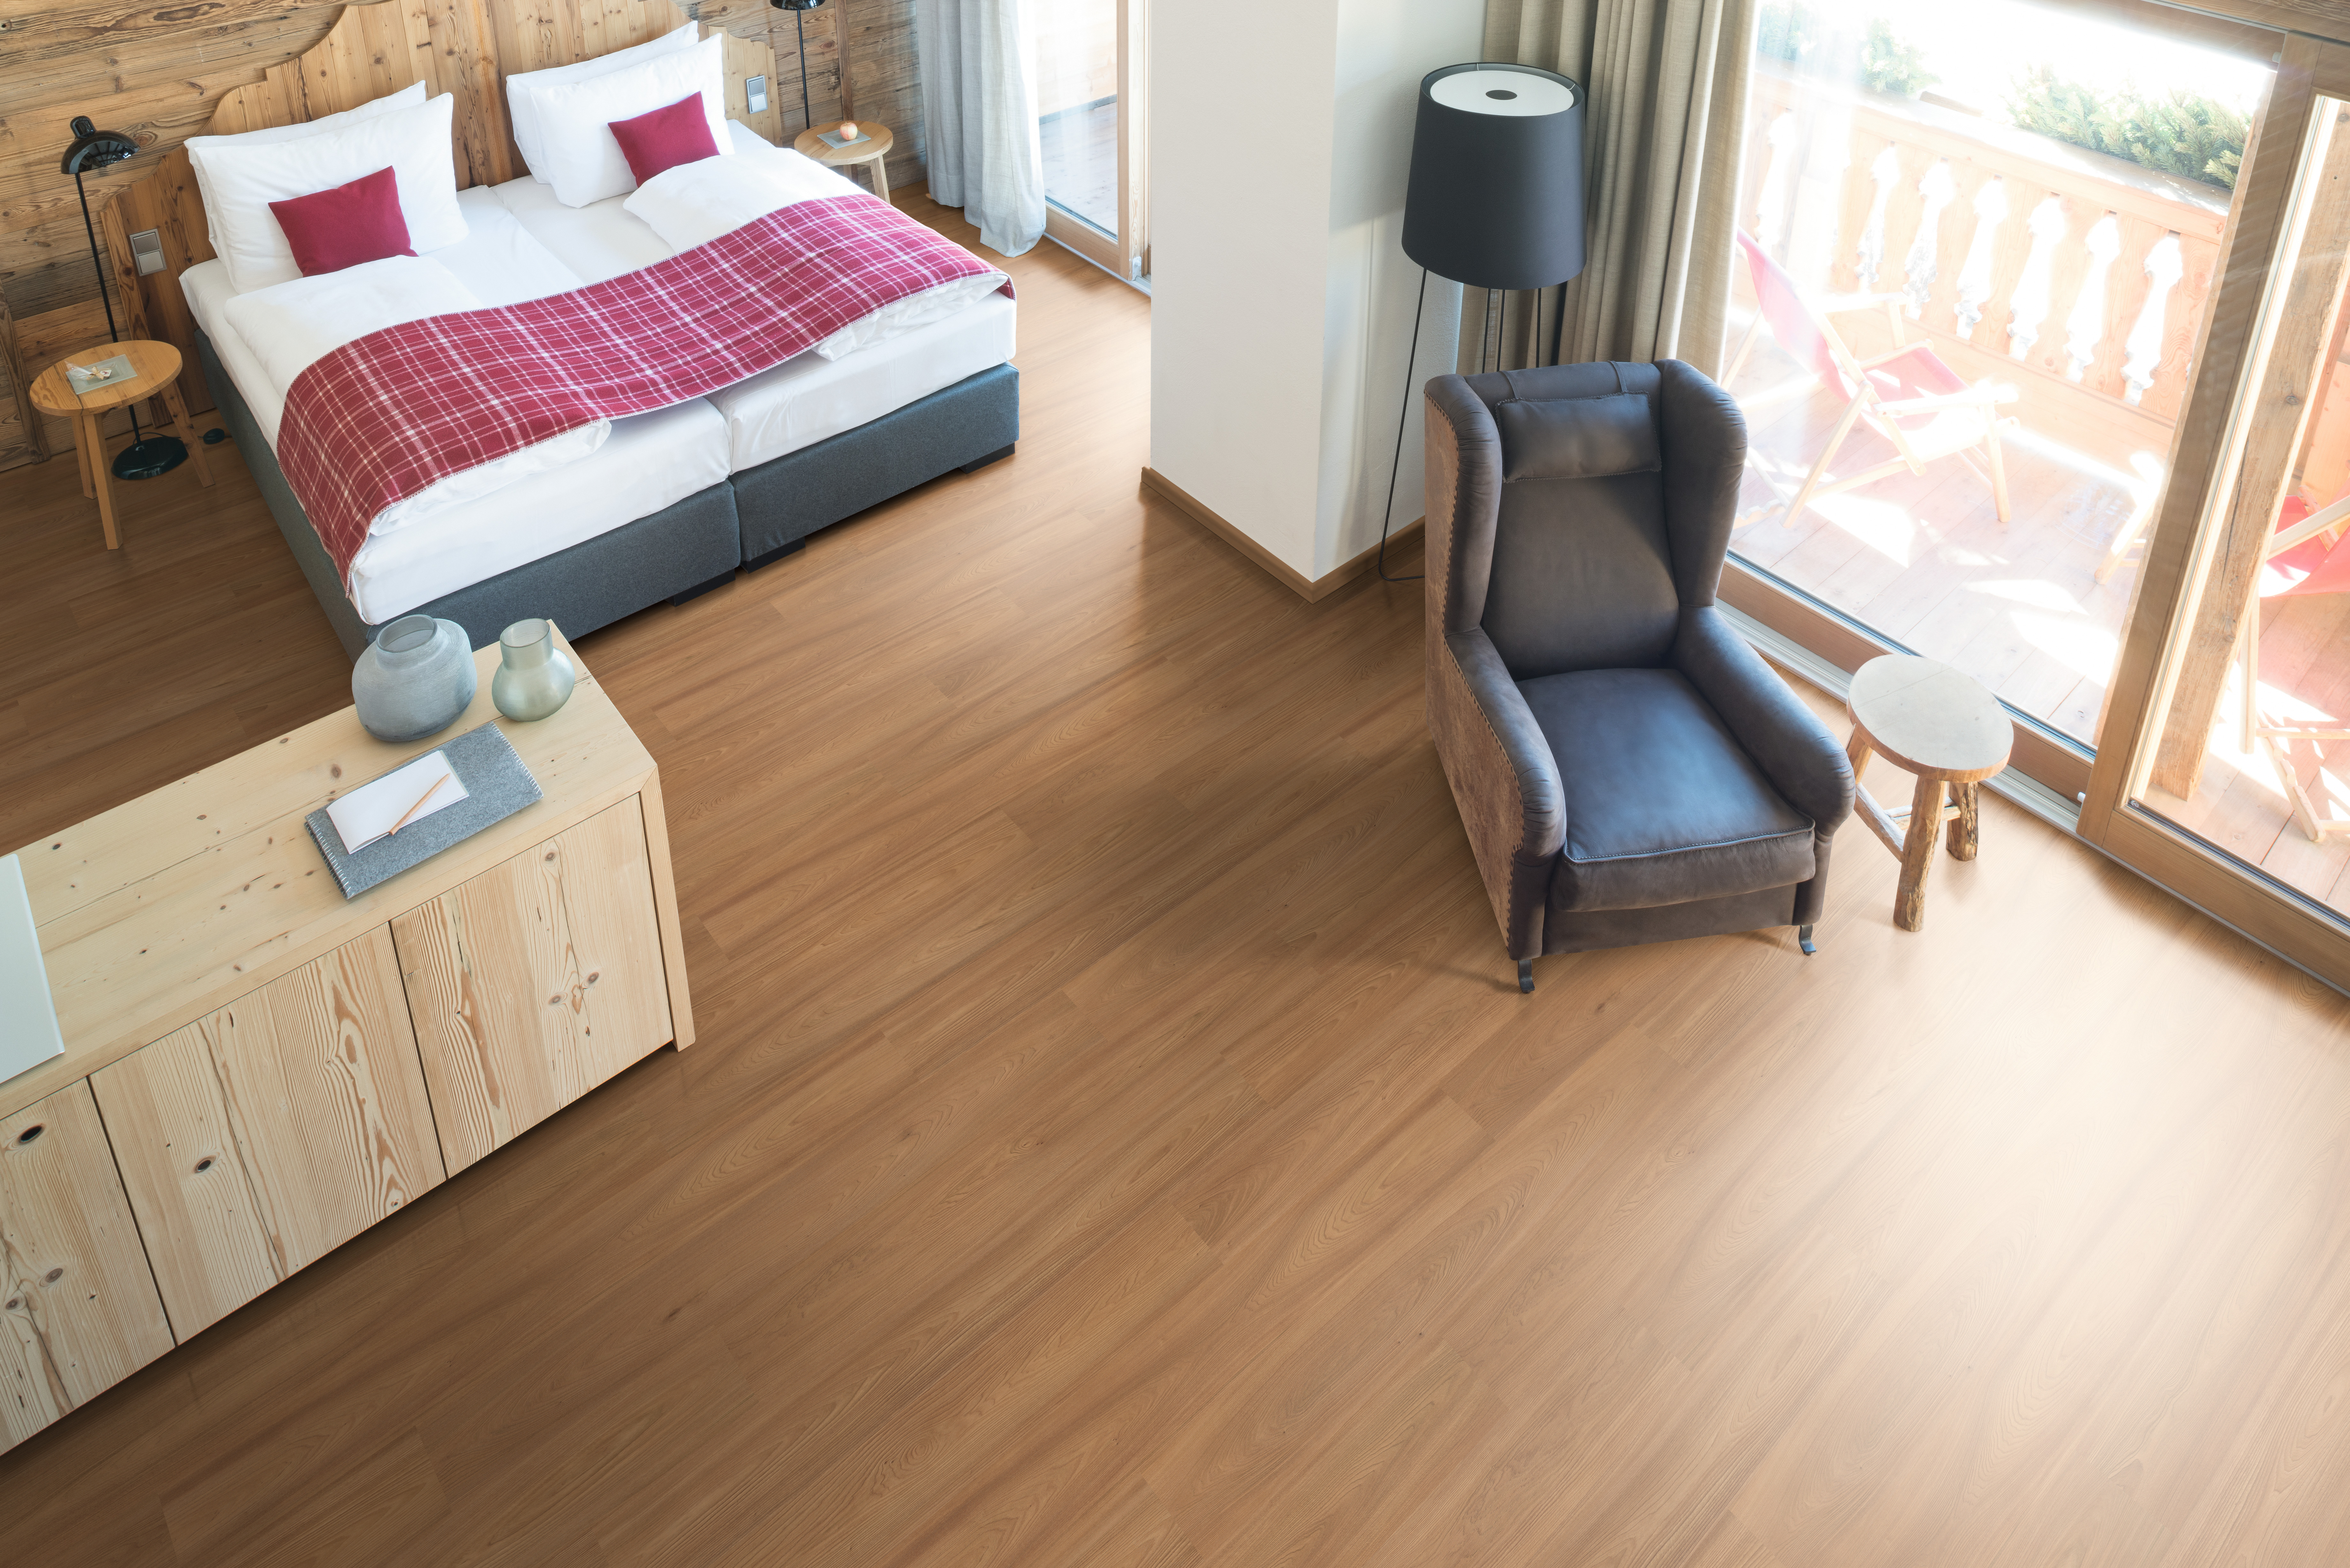 Wide floorboards emphasise the size of the space